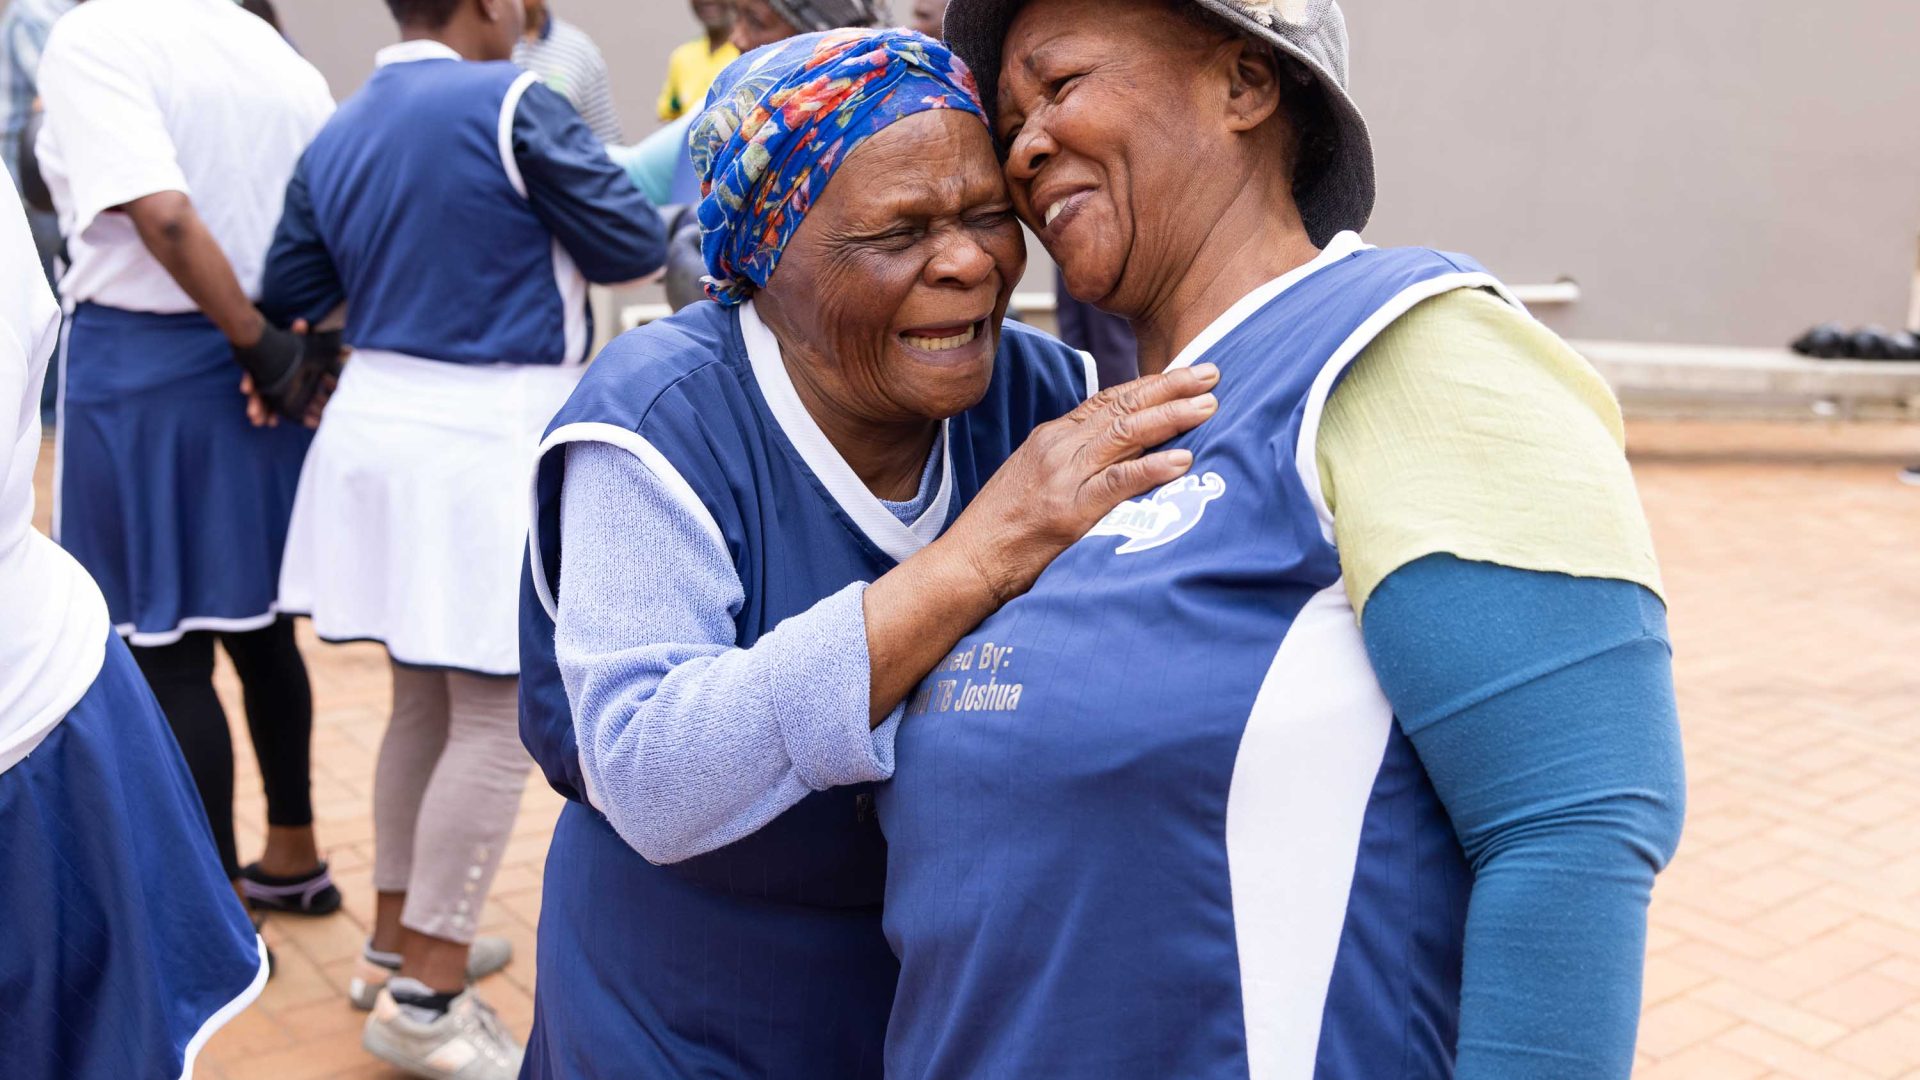 Two boxing grannies hug and smile together.